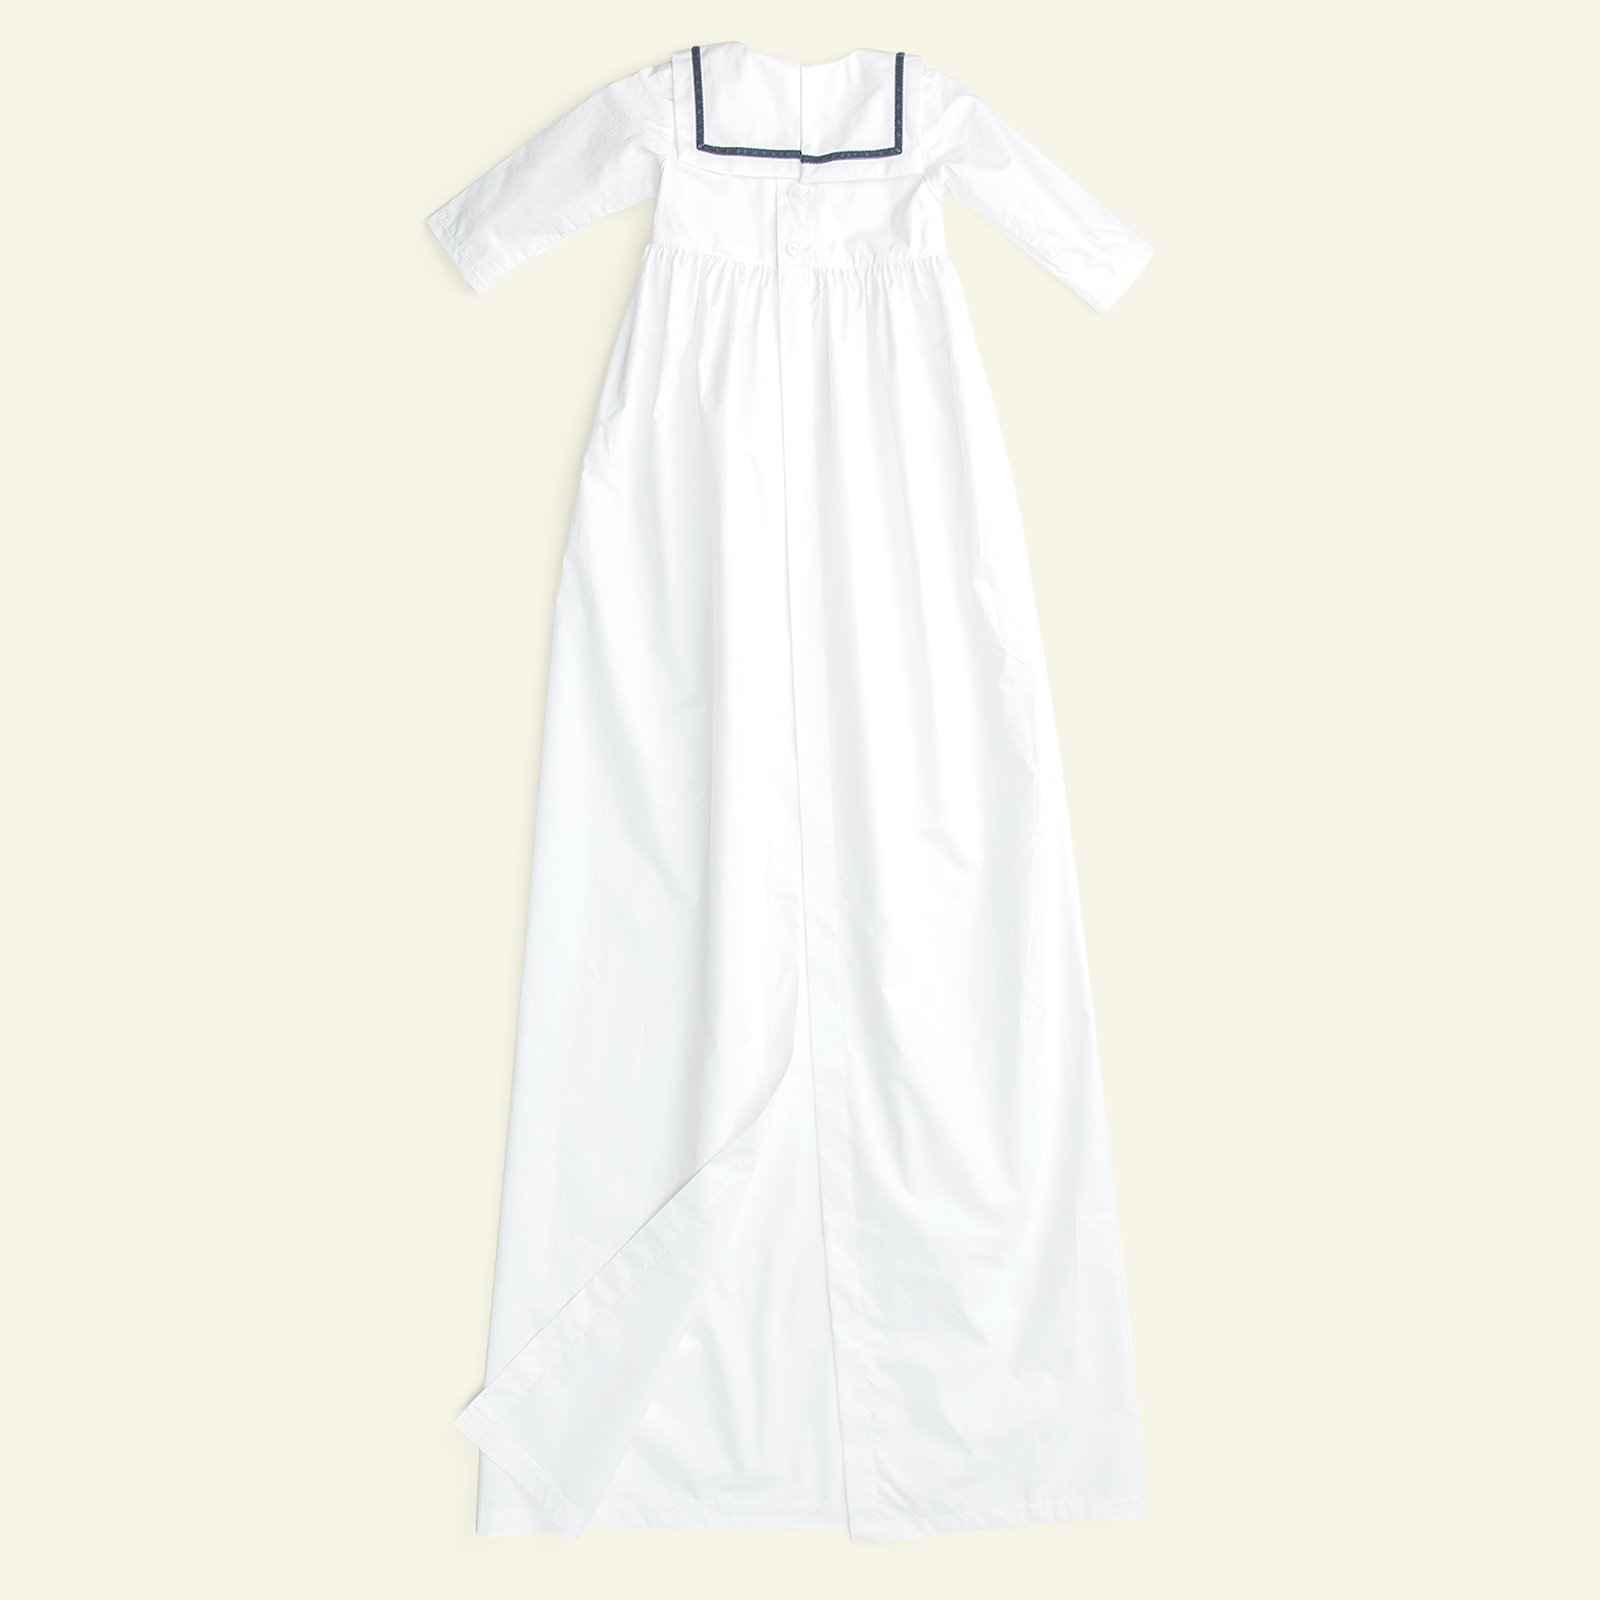 Own designed christening gown, 80/1y p83018_26023_540111_pack_b